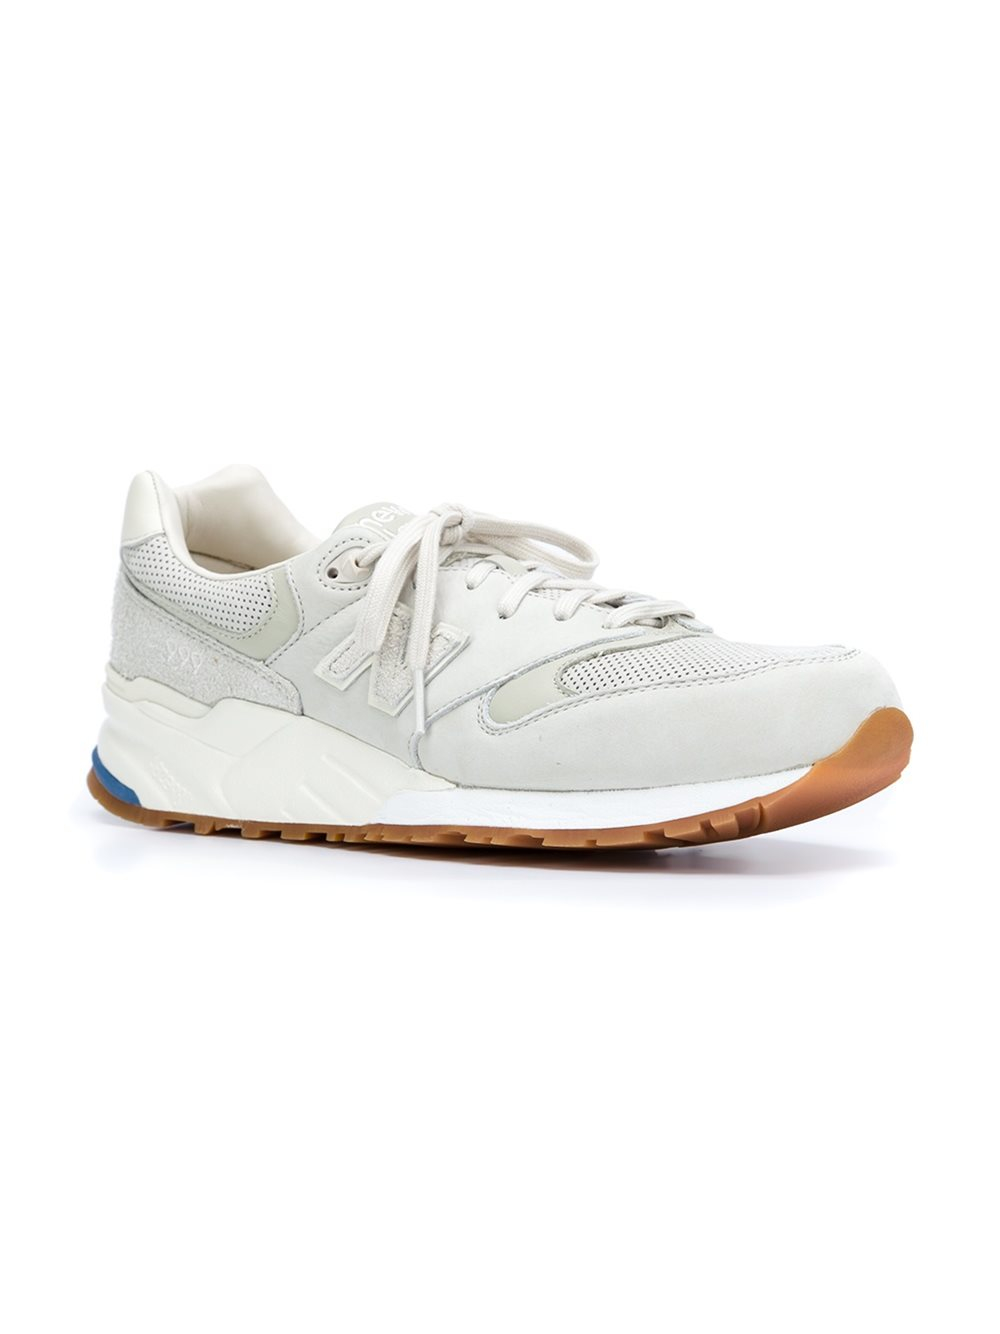 New Balance '999 Luxury' Sneakers in White for Men - Lyst